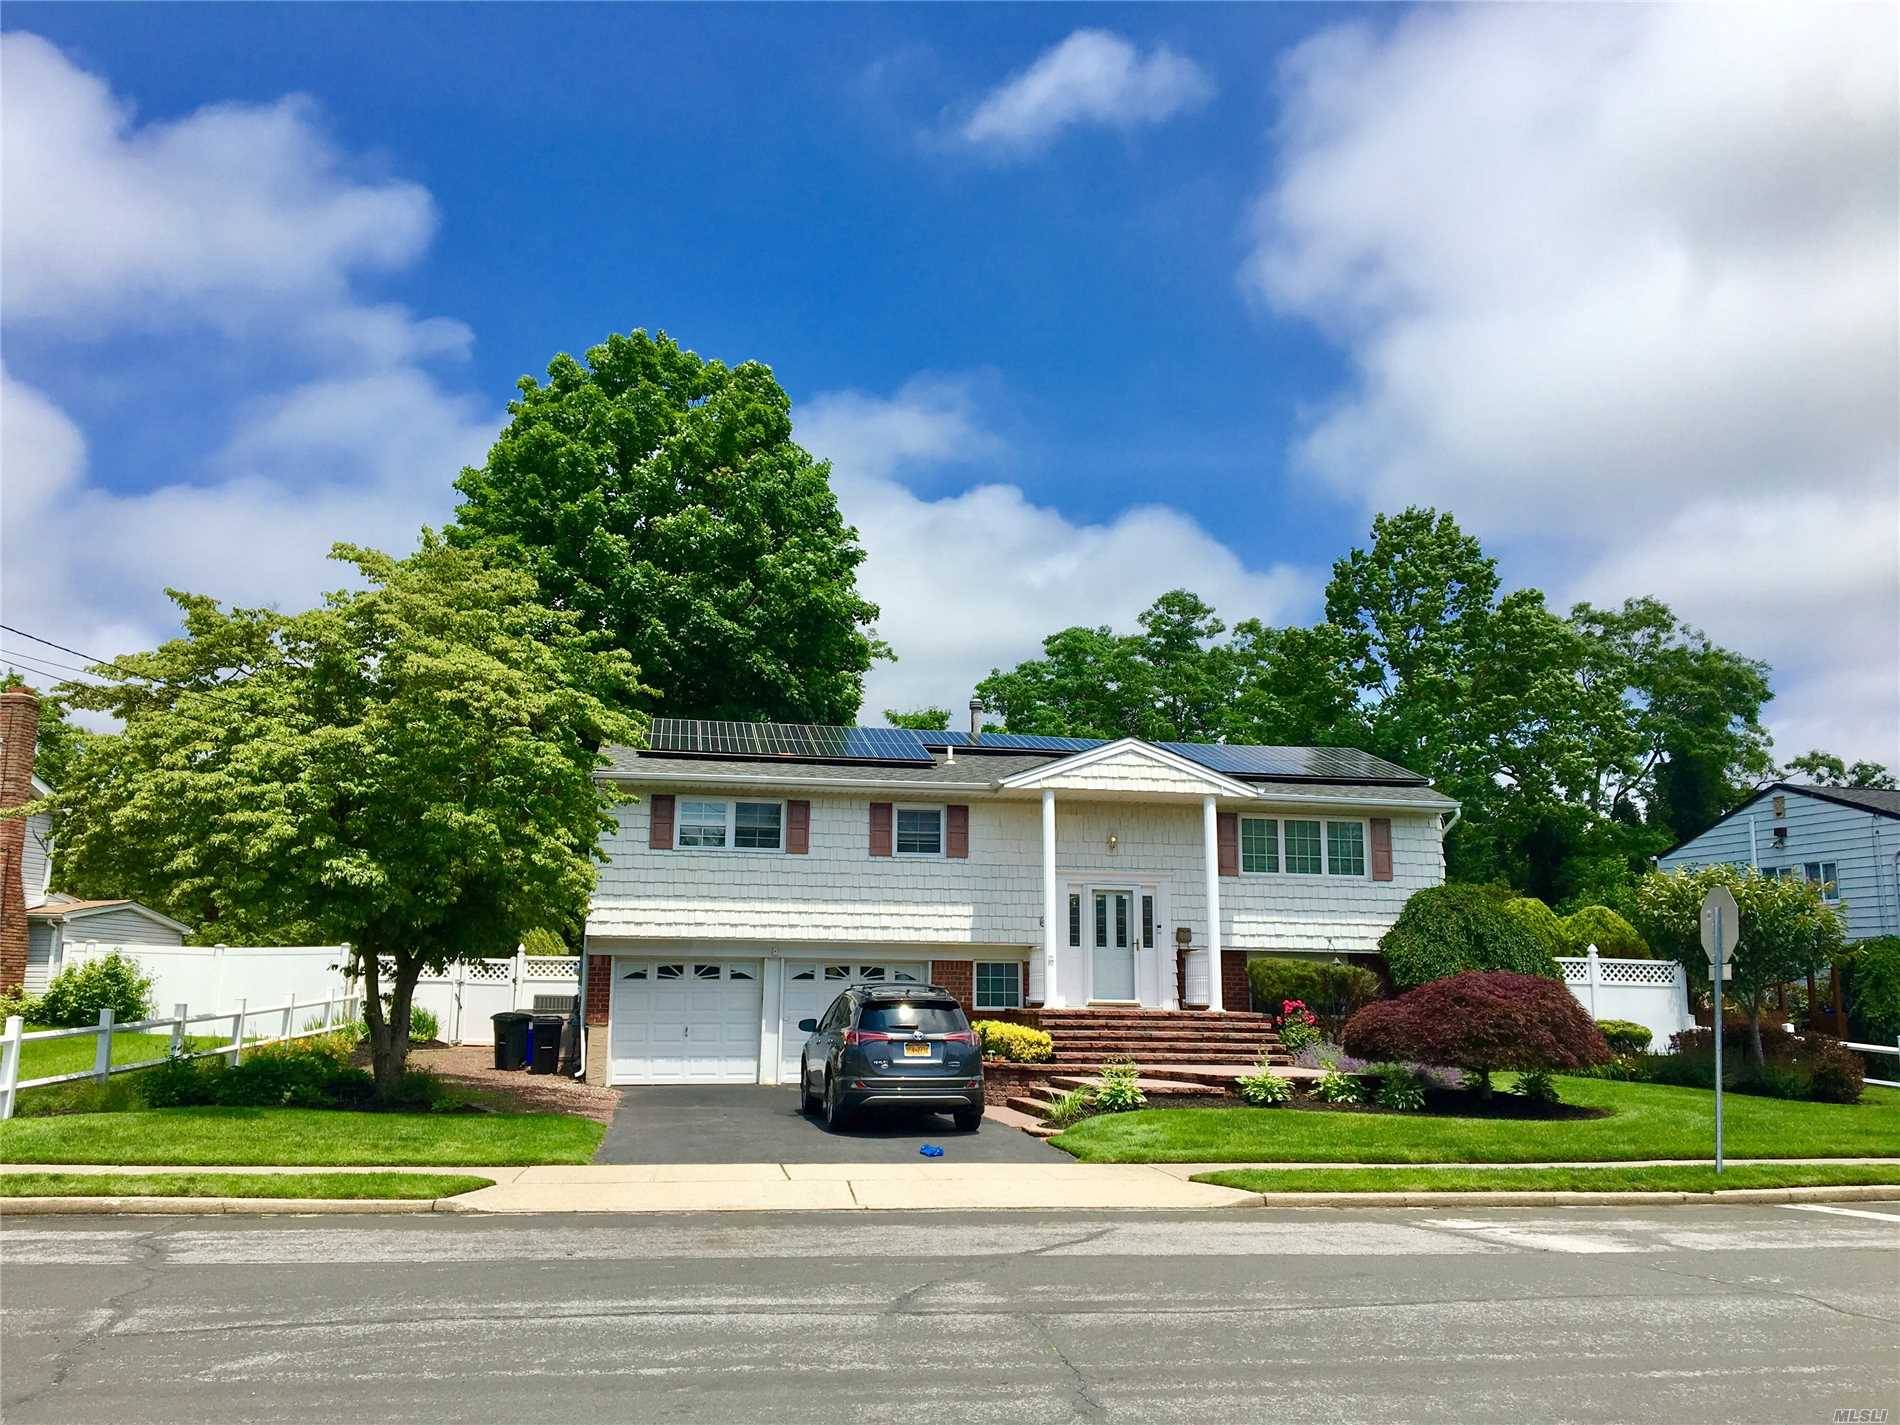 Gorgeous Home In One Of Li's Tops School Districts W/ Solar Power, New Kitchen W/Quartz Counter-Tops, Blk Stainless Appliances And Plenty Of Cabinets.